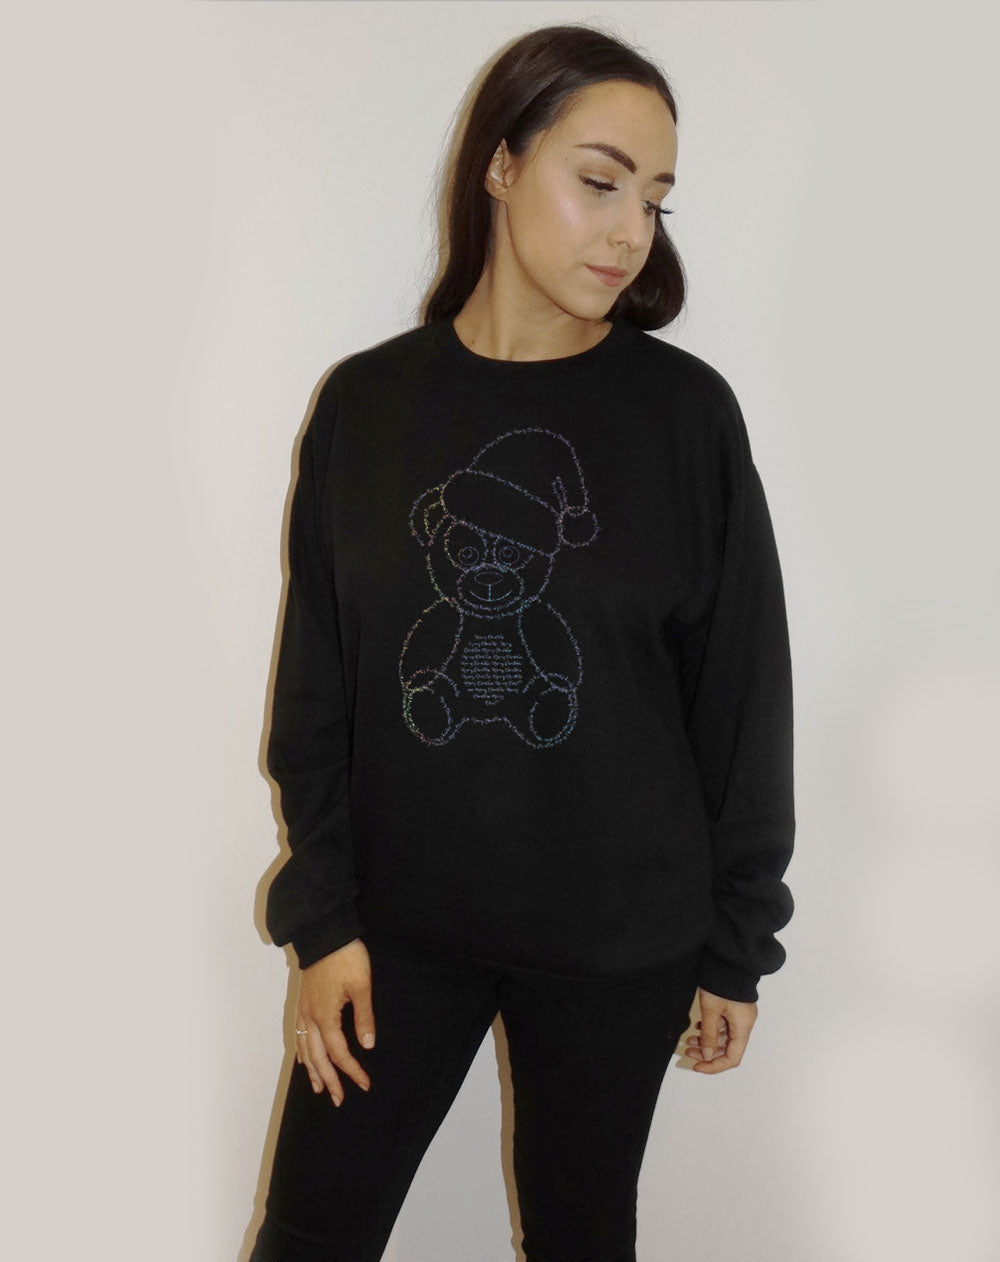 Black Christmas Jumper With  Festive Font Teddy Claus